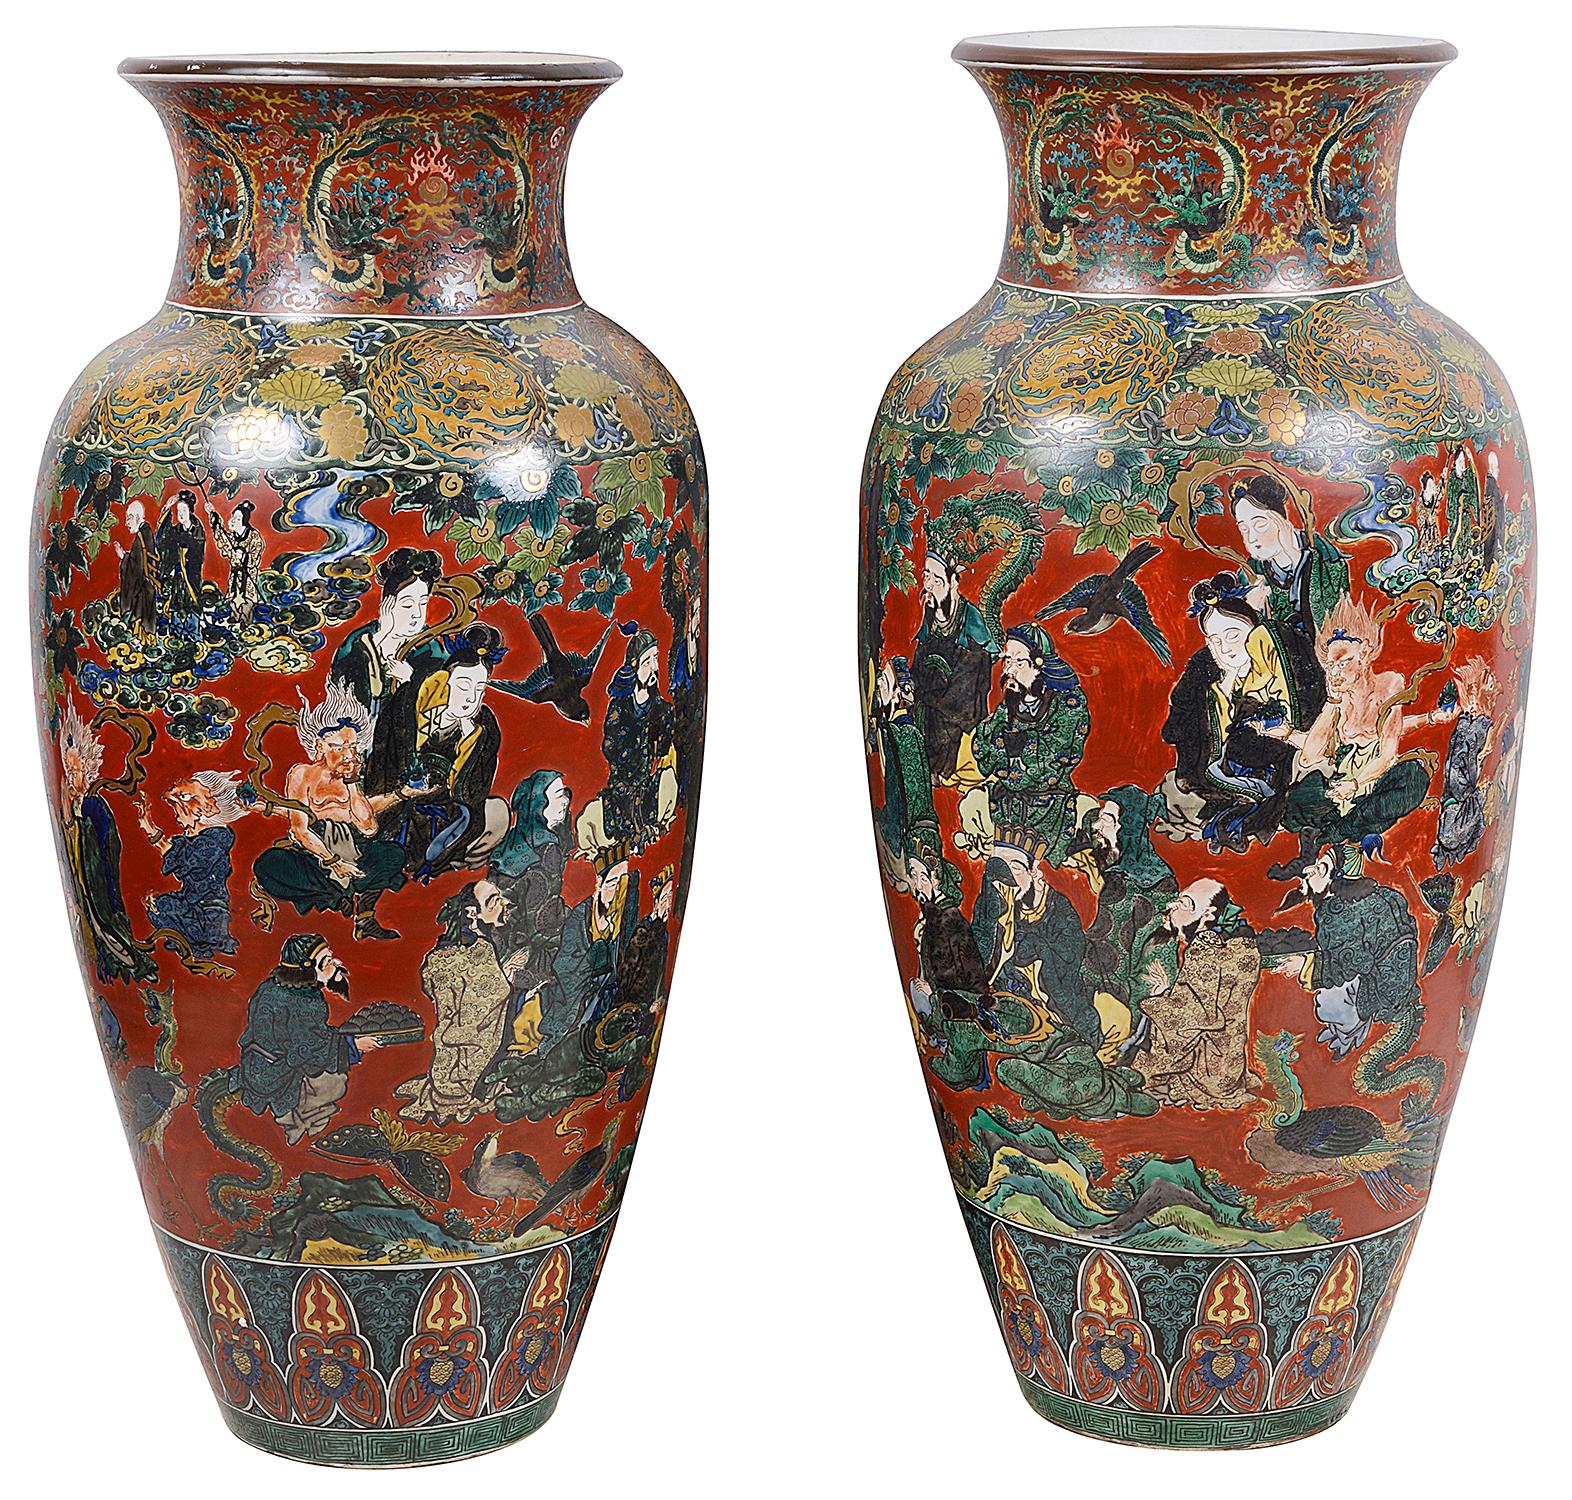 A magnificent pair of Japanese Meiji period (1868-1912) Kutani porcelain vases. Having wonderful hand painted images of attendants gathering in morning, having classical motif decoration top and bottom, signed to bases. Size: 100cm (39.5